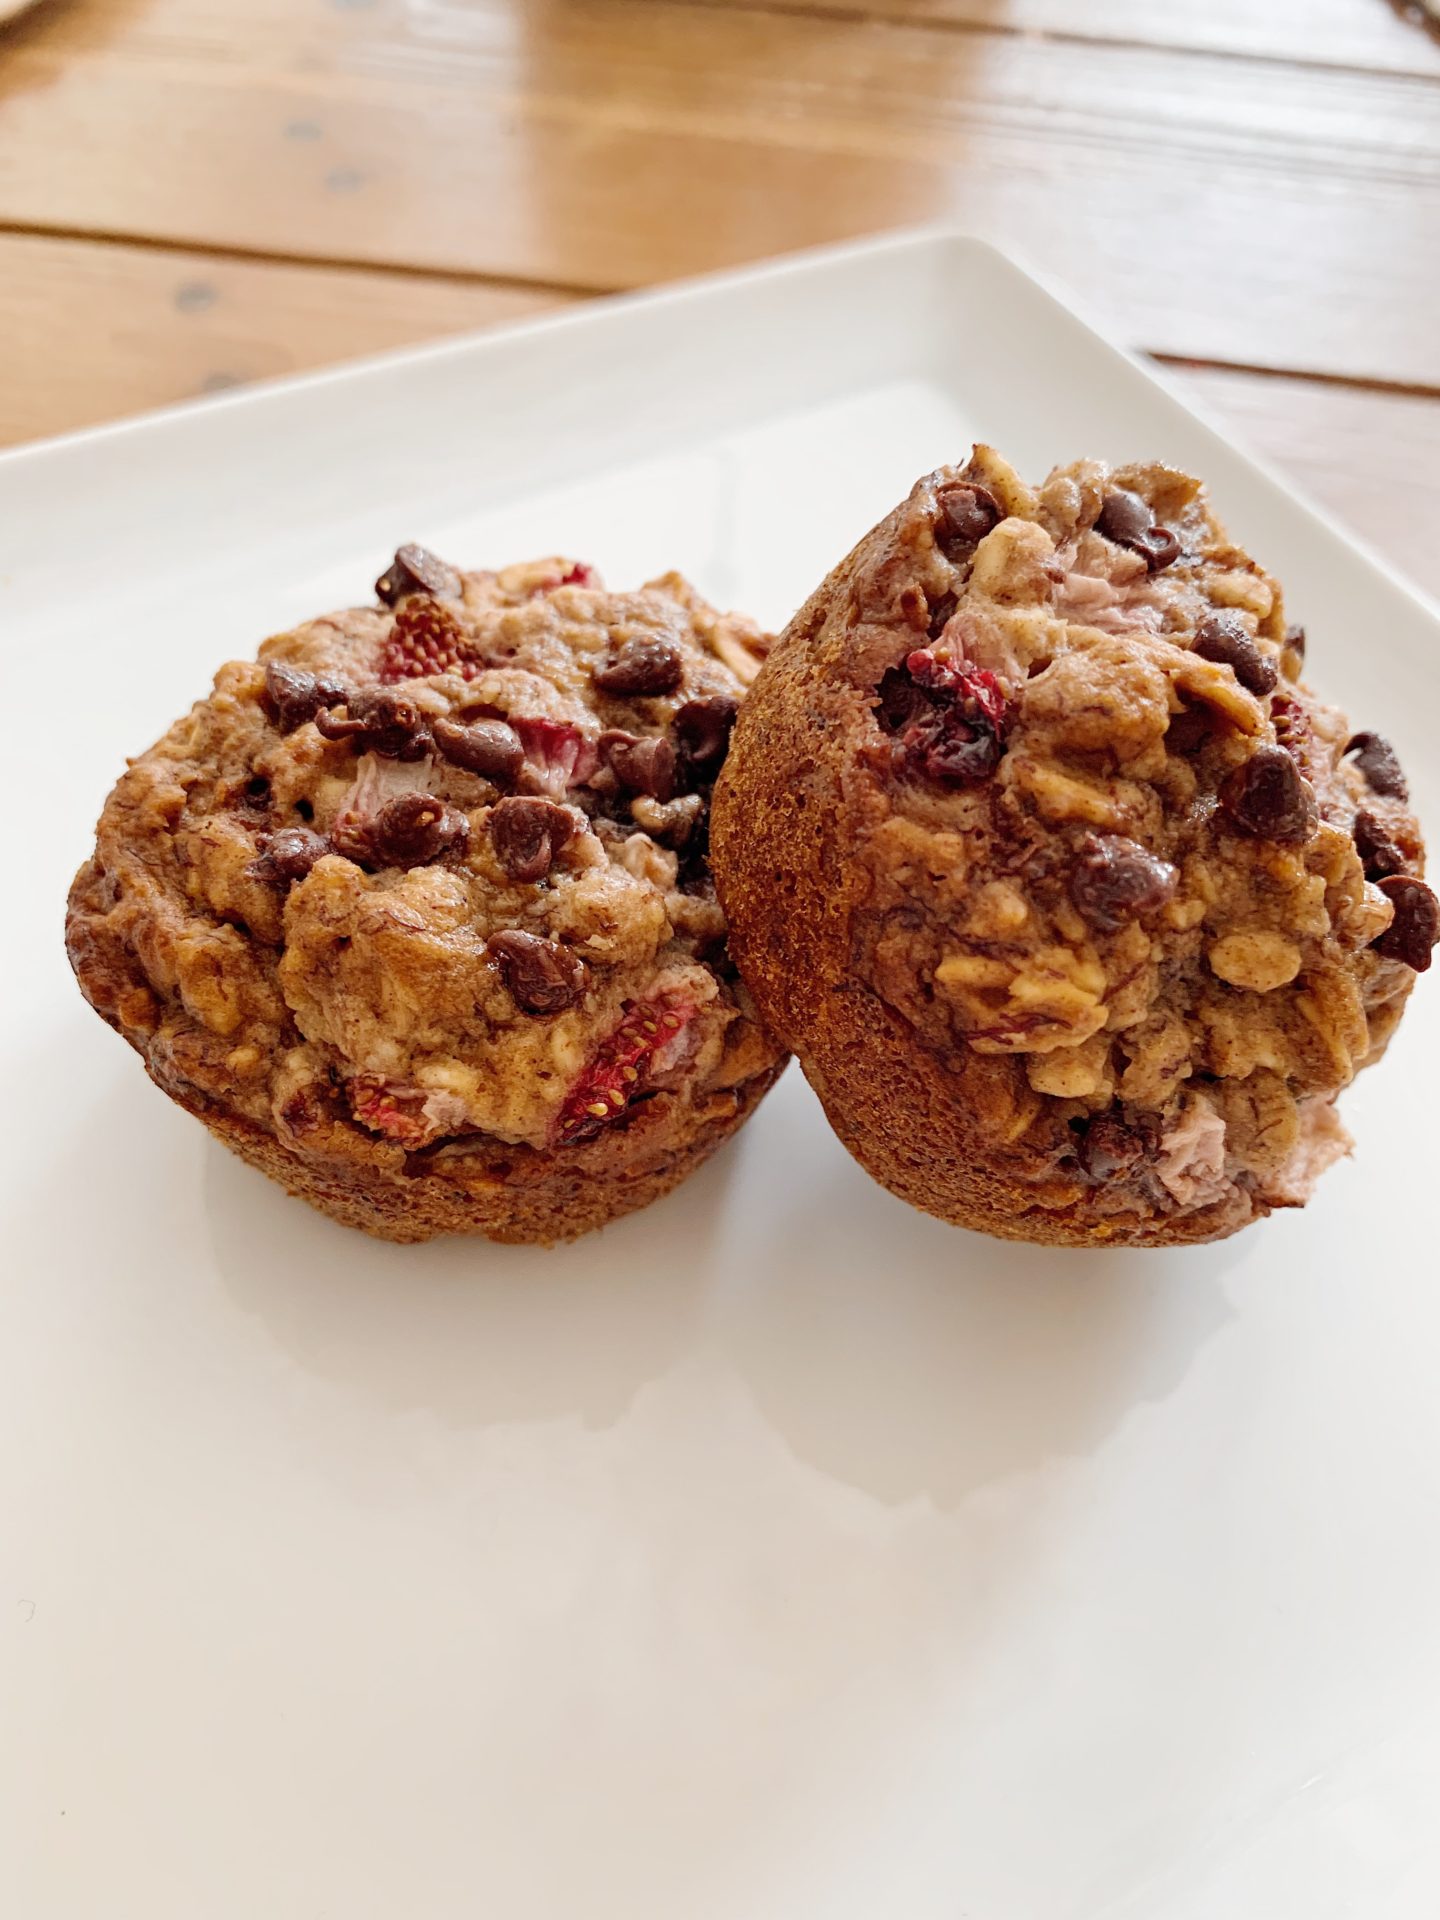 Toddler Approved Oatmeal Muffins